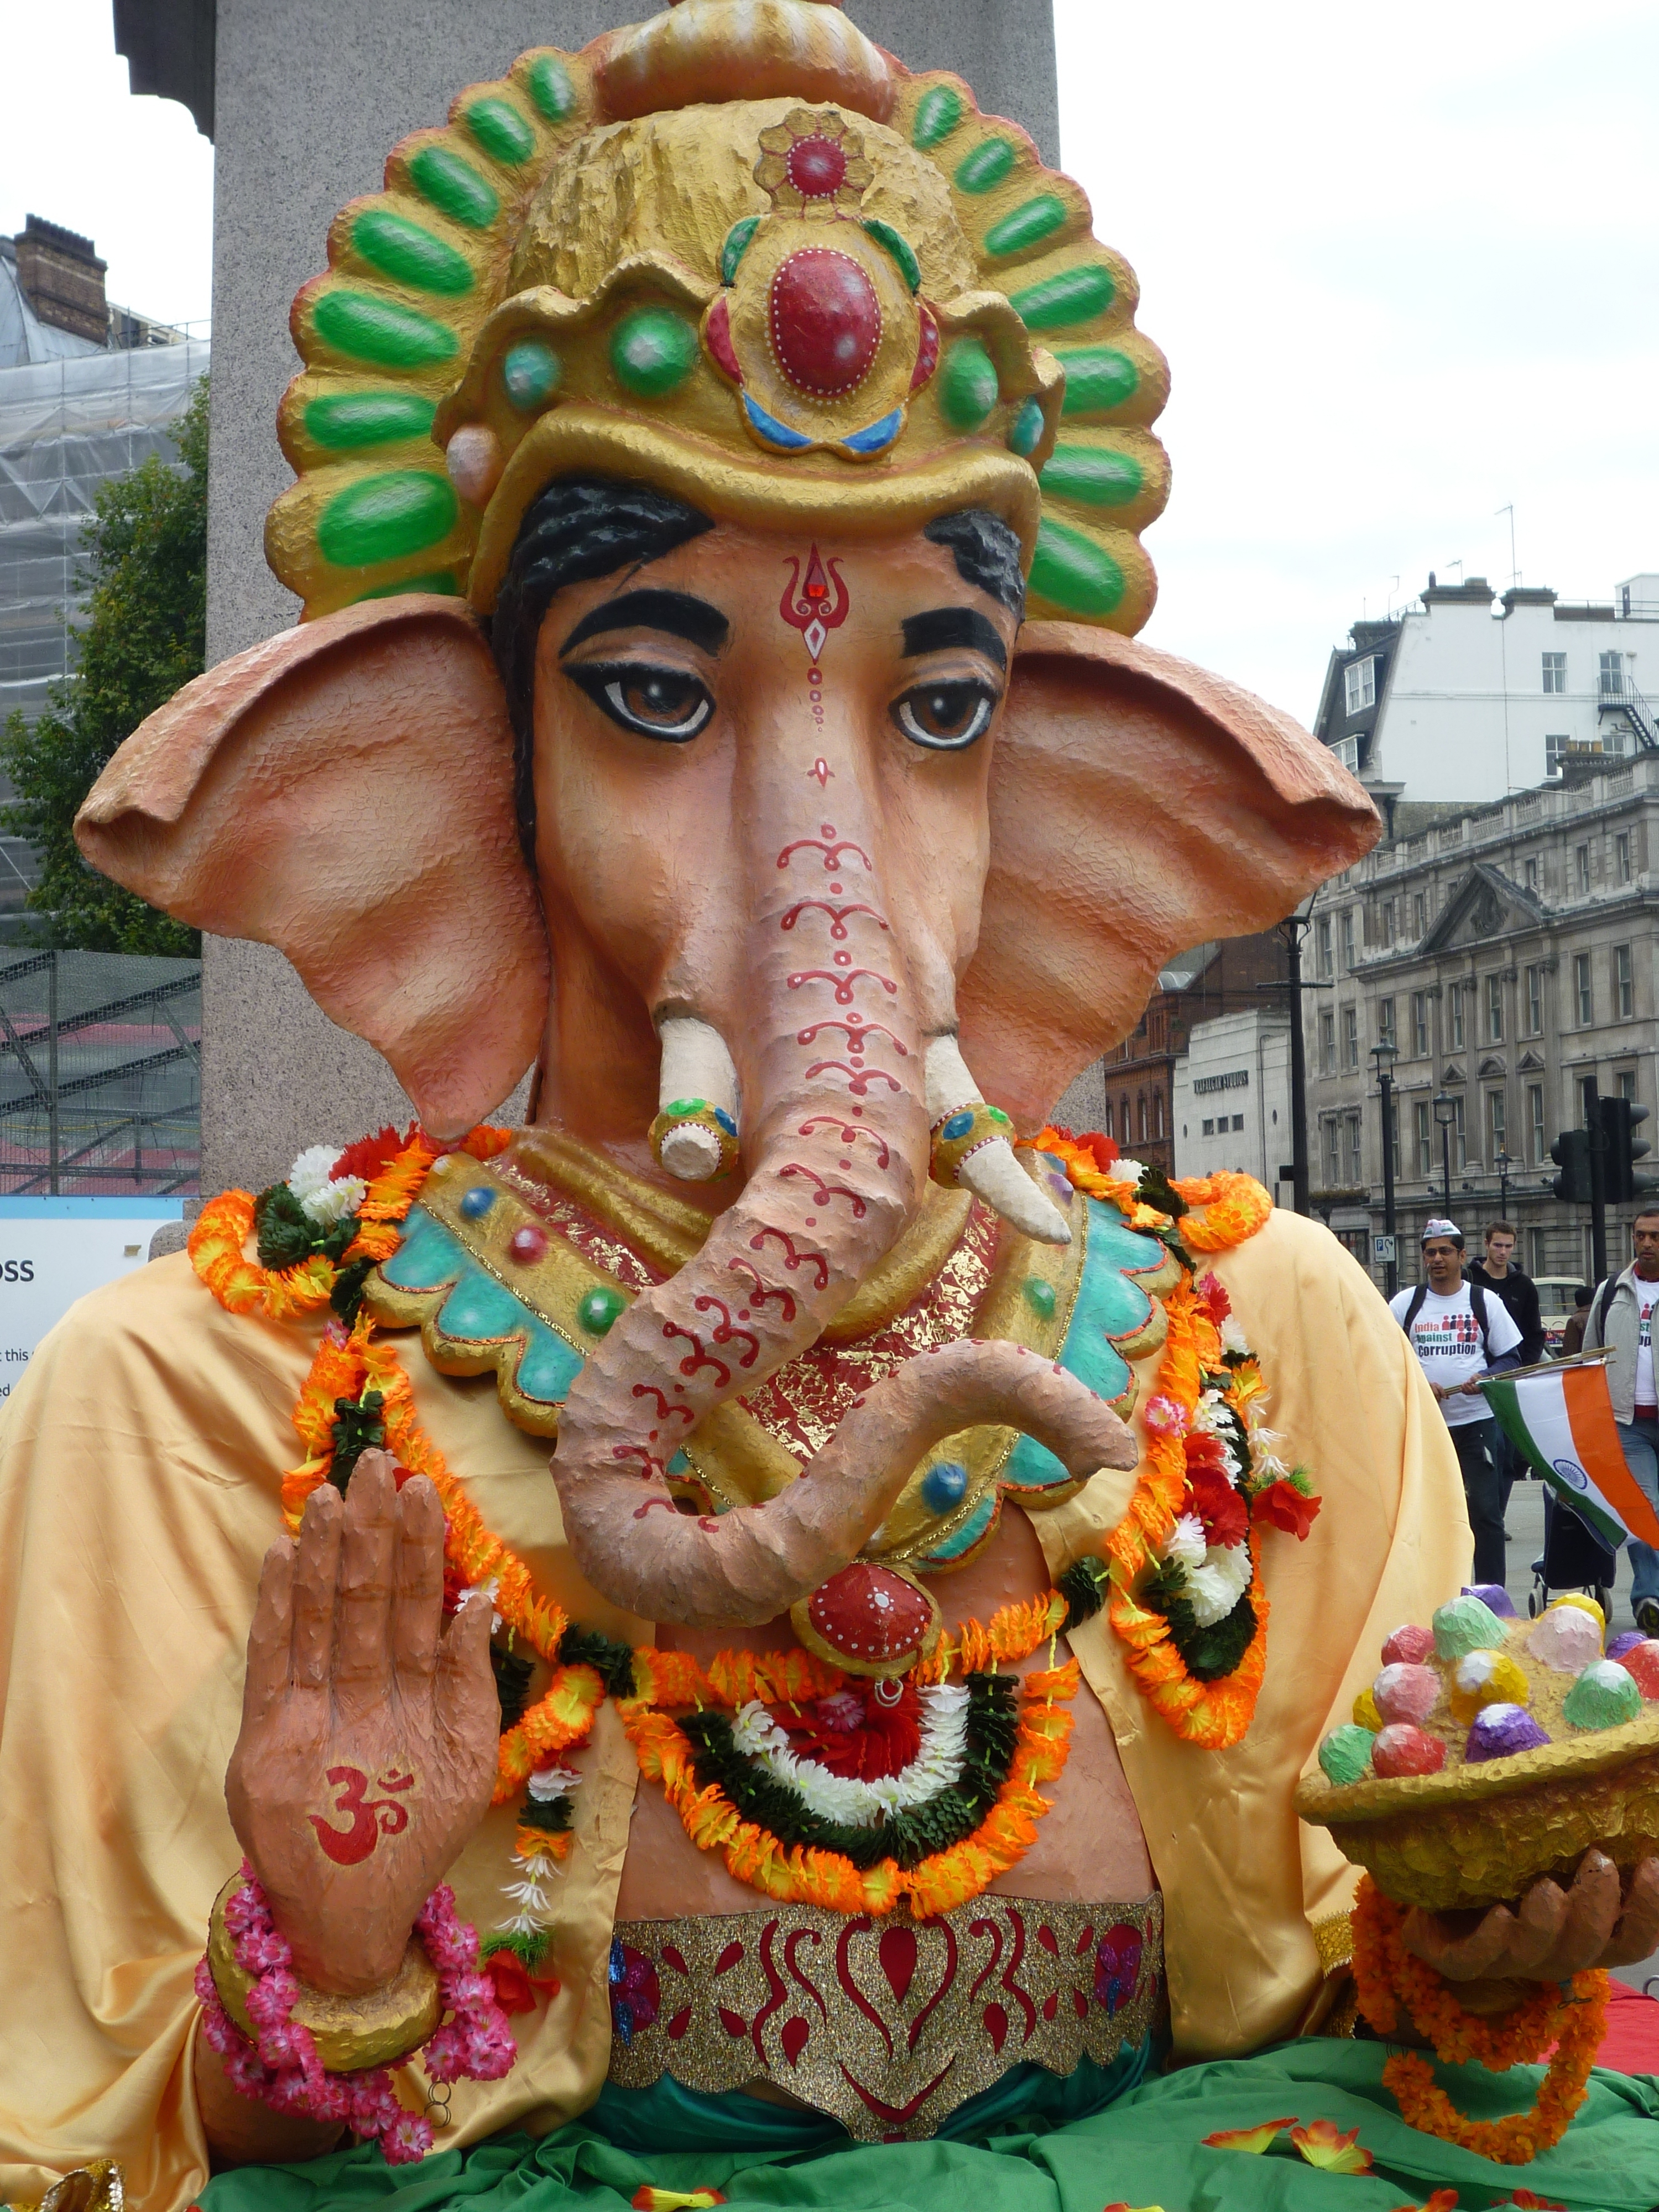 Things to Do in London - Diwali